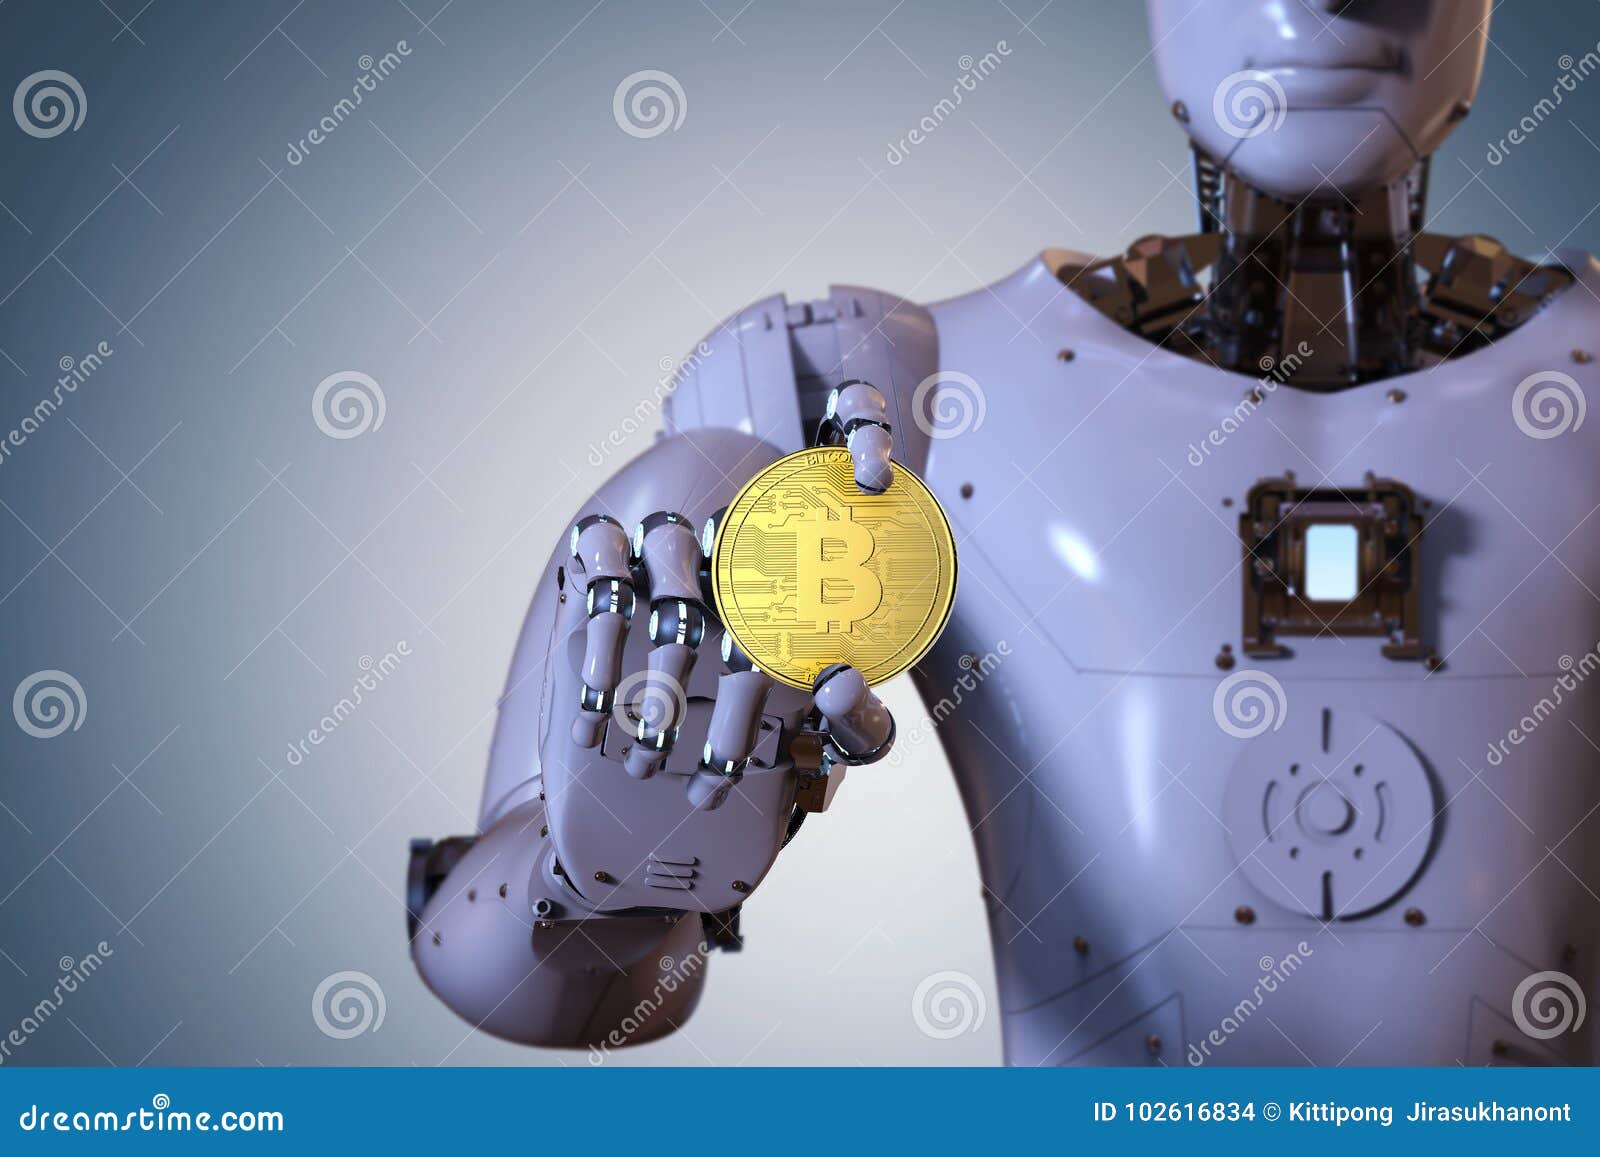 robot commerciale bitcoin co id